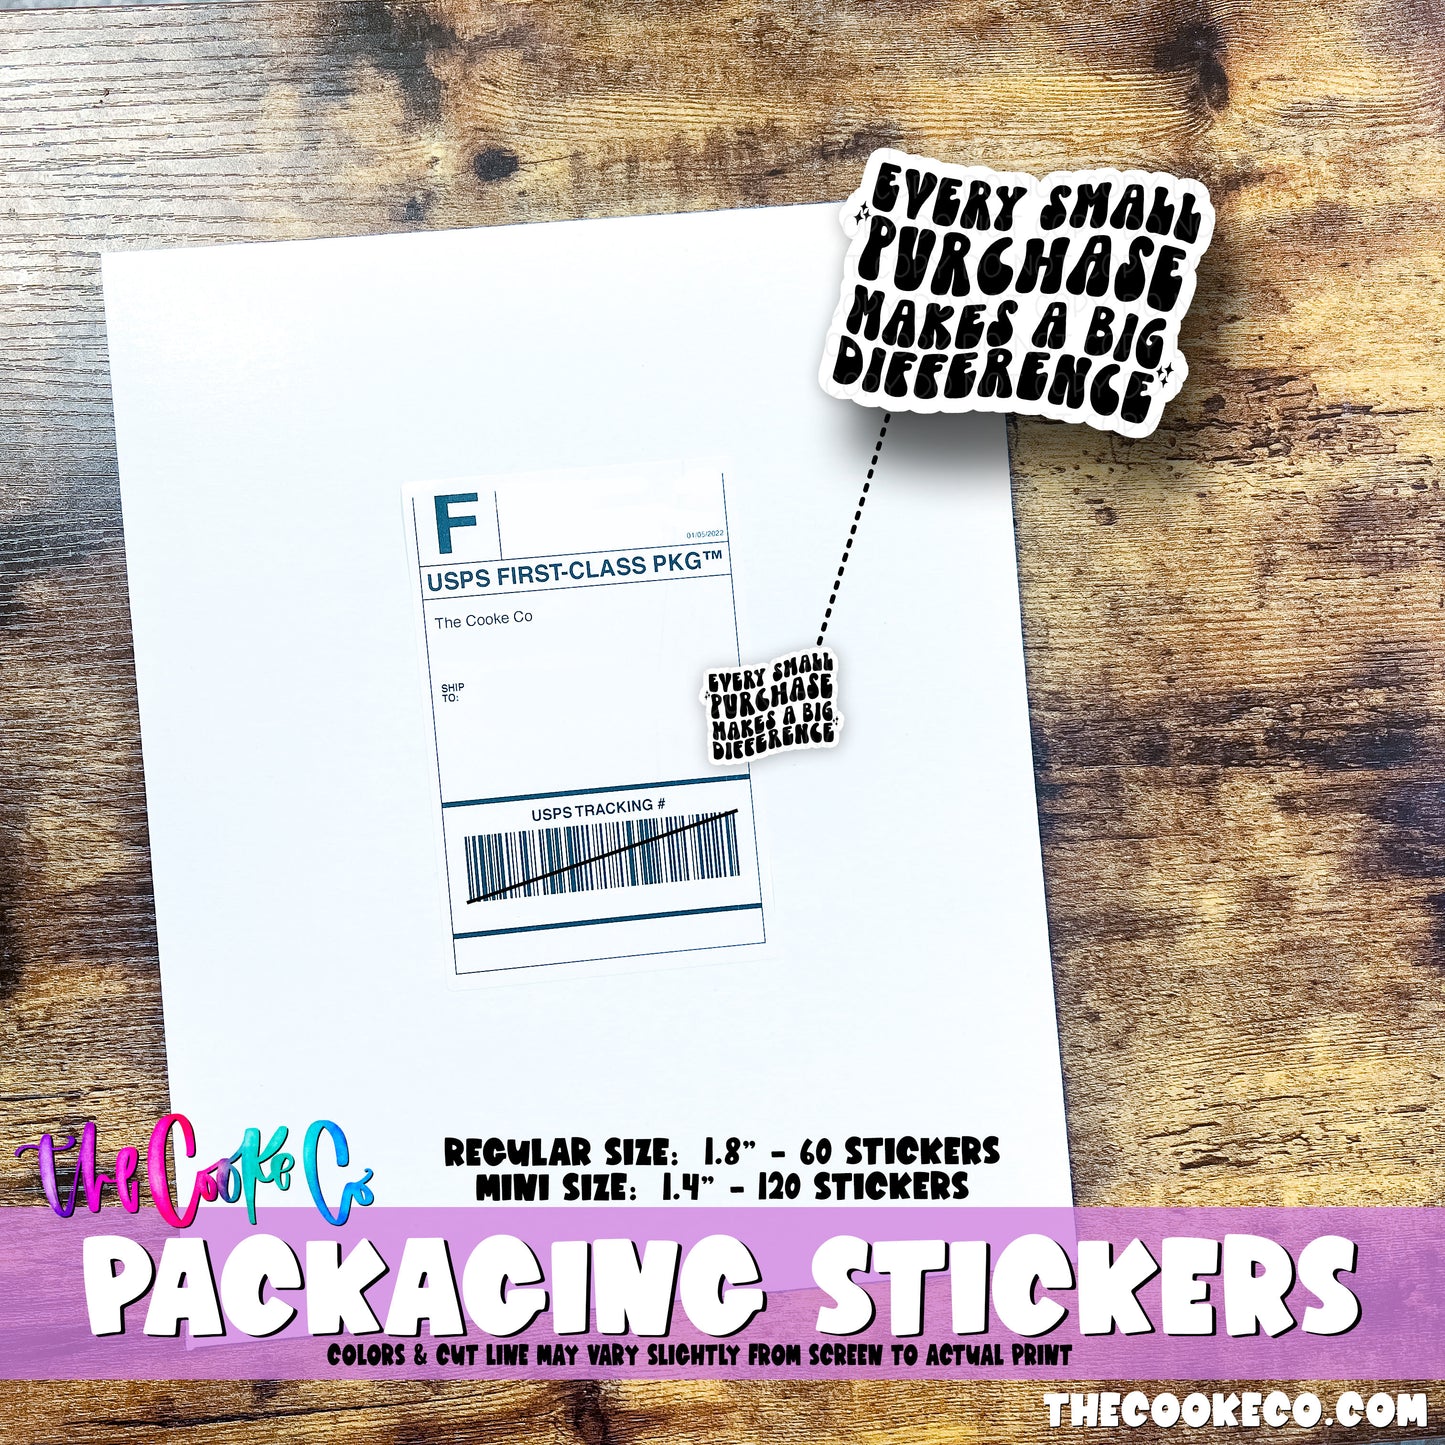 Packaging Stickers | #BW0208 - EVERY SMALL PURCHASE MAKES A BIG DIFFERENCE